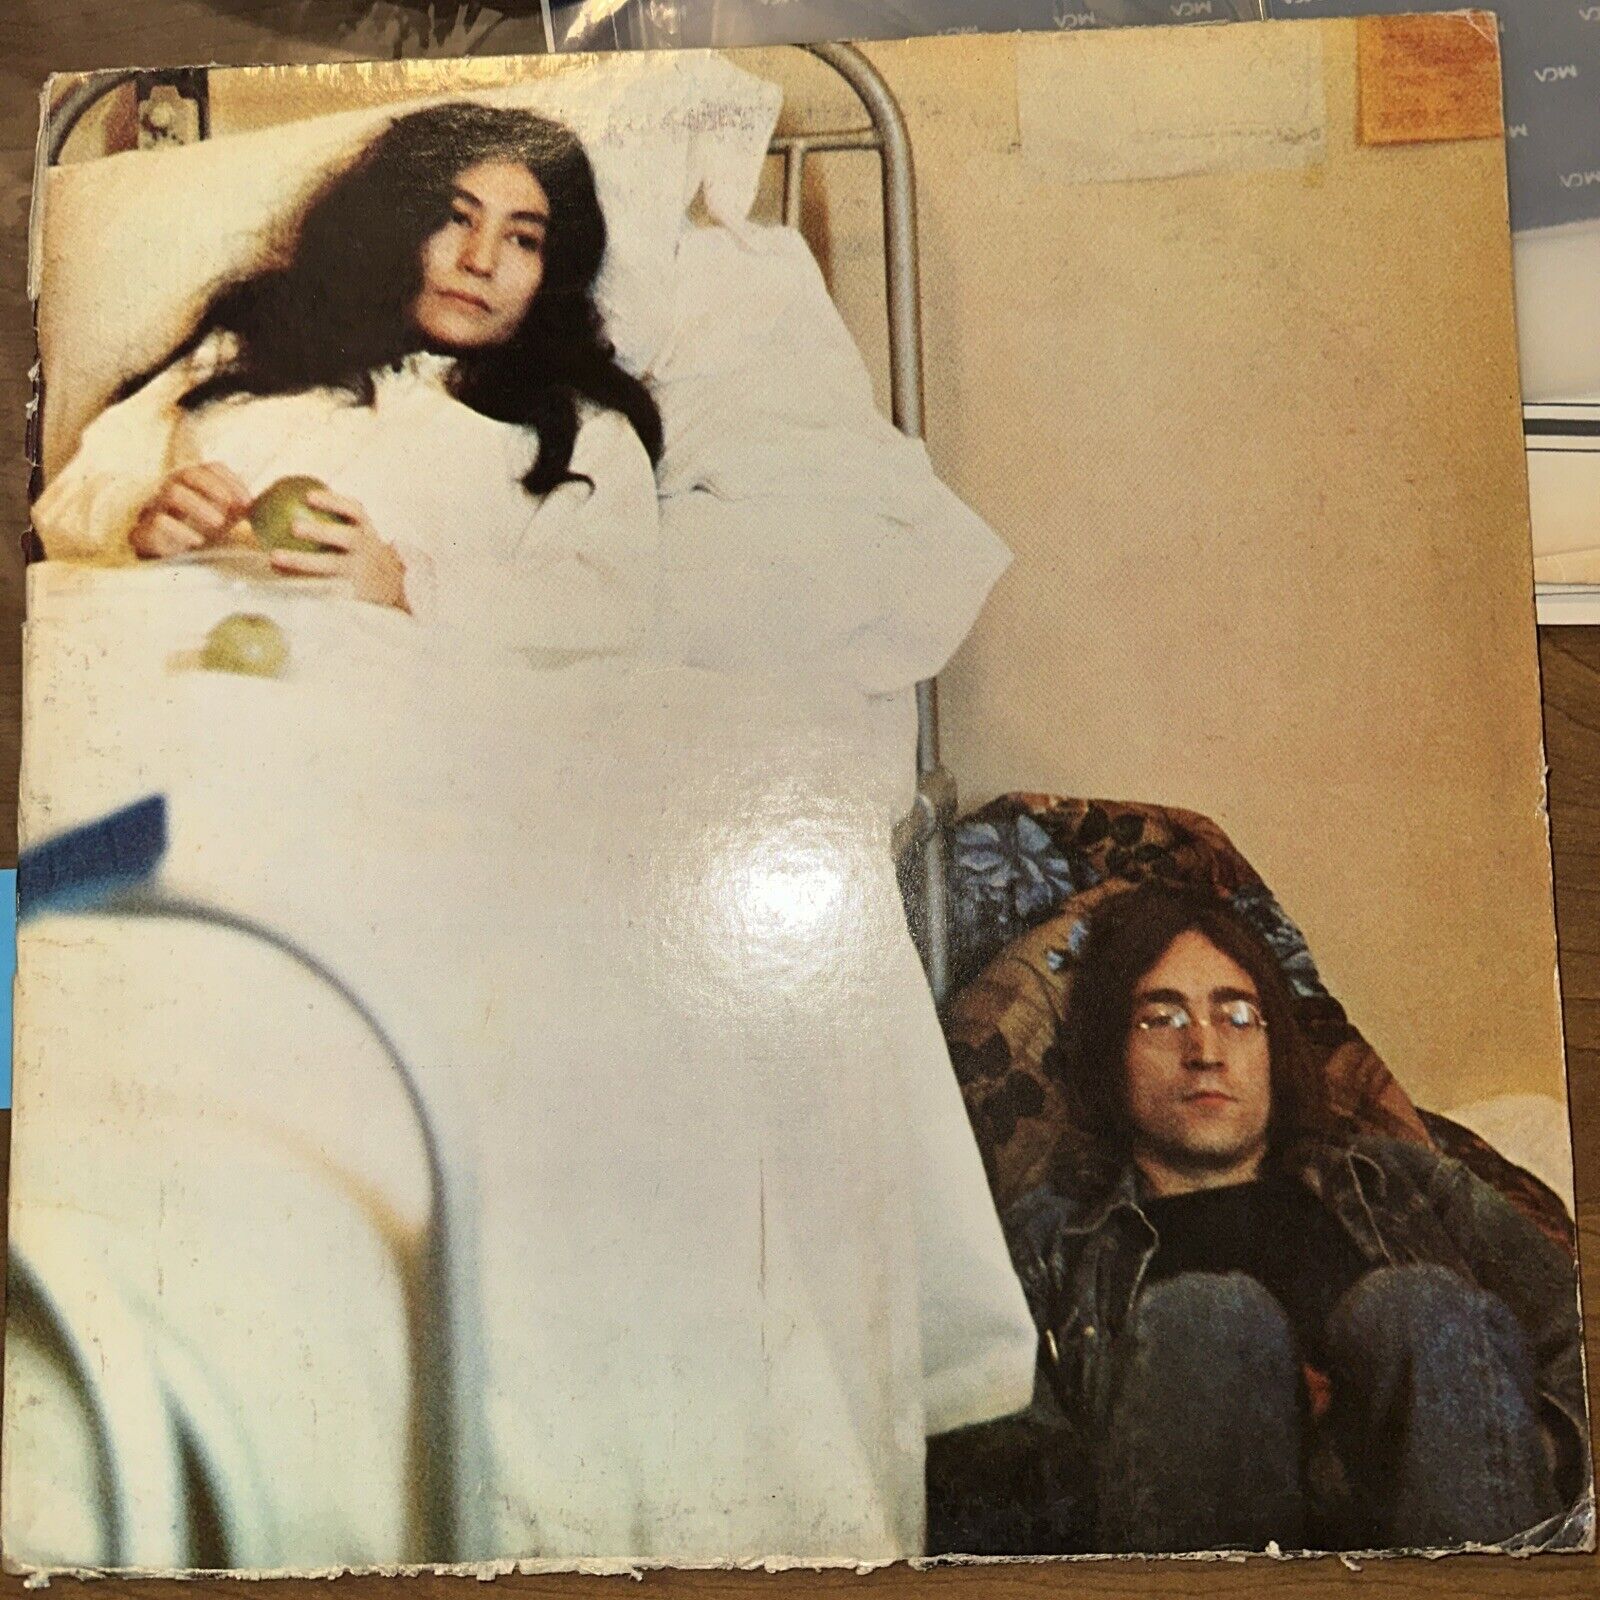 JOHN LENNON & YOKO ONO   UNFINISHED MUSIC NO. 2   LIFE WITH THE LIONS    BEATLES